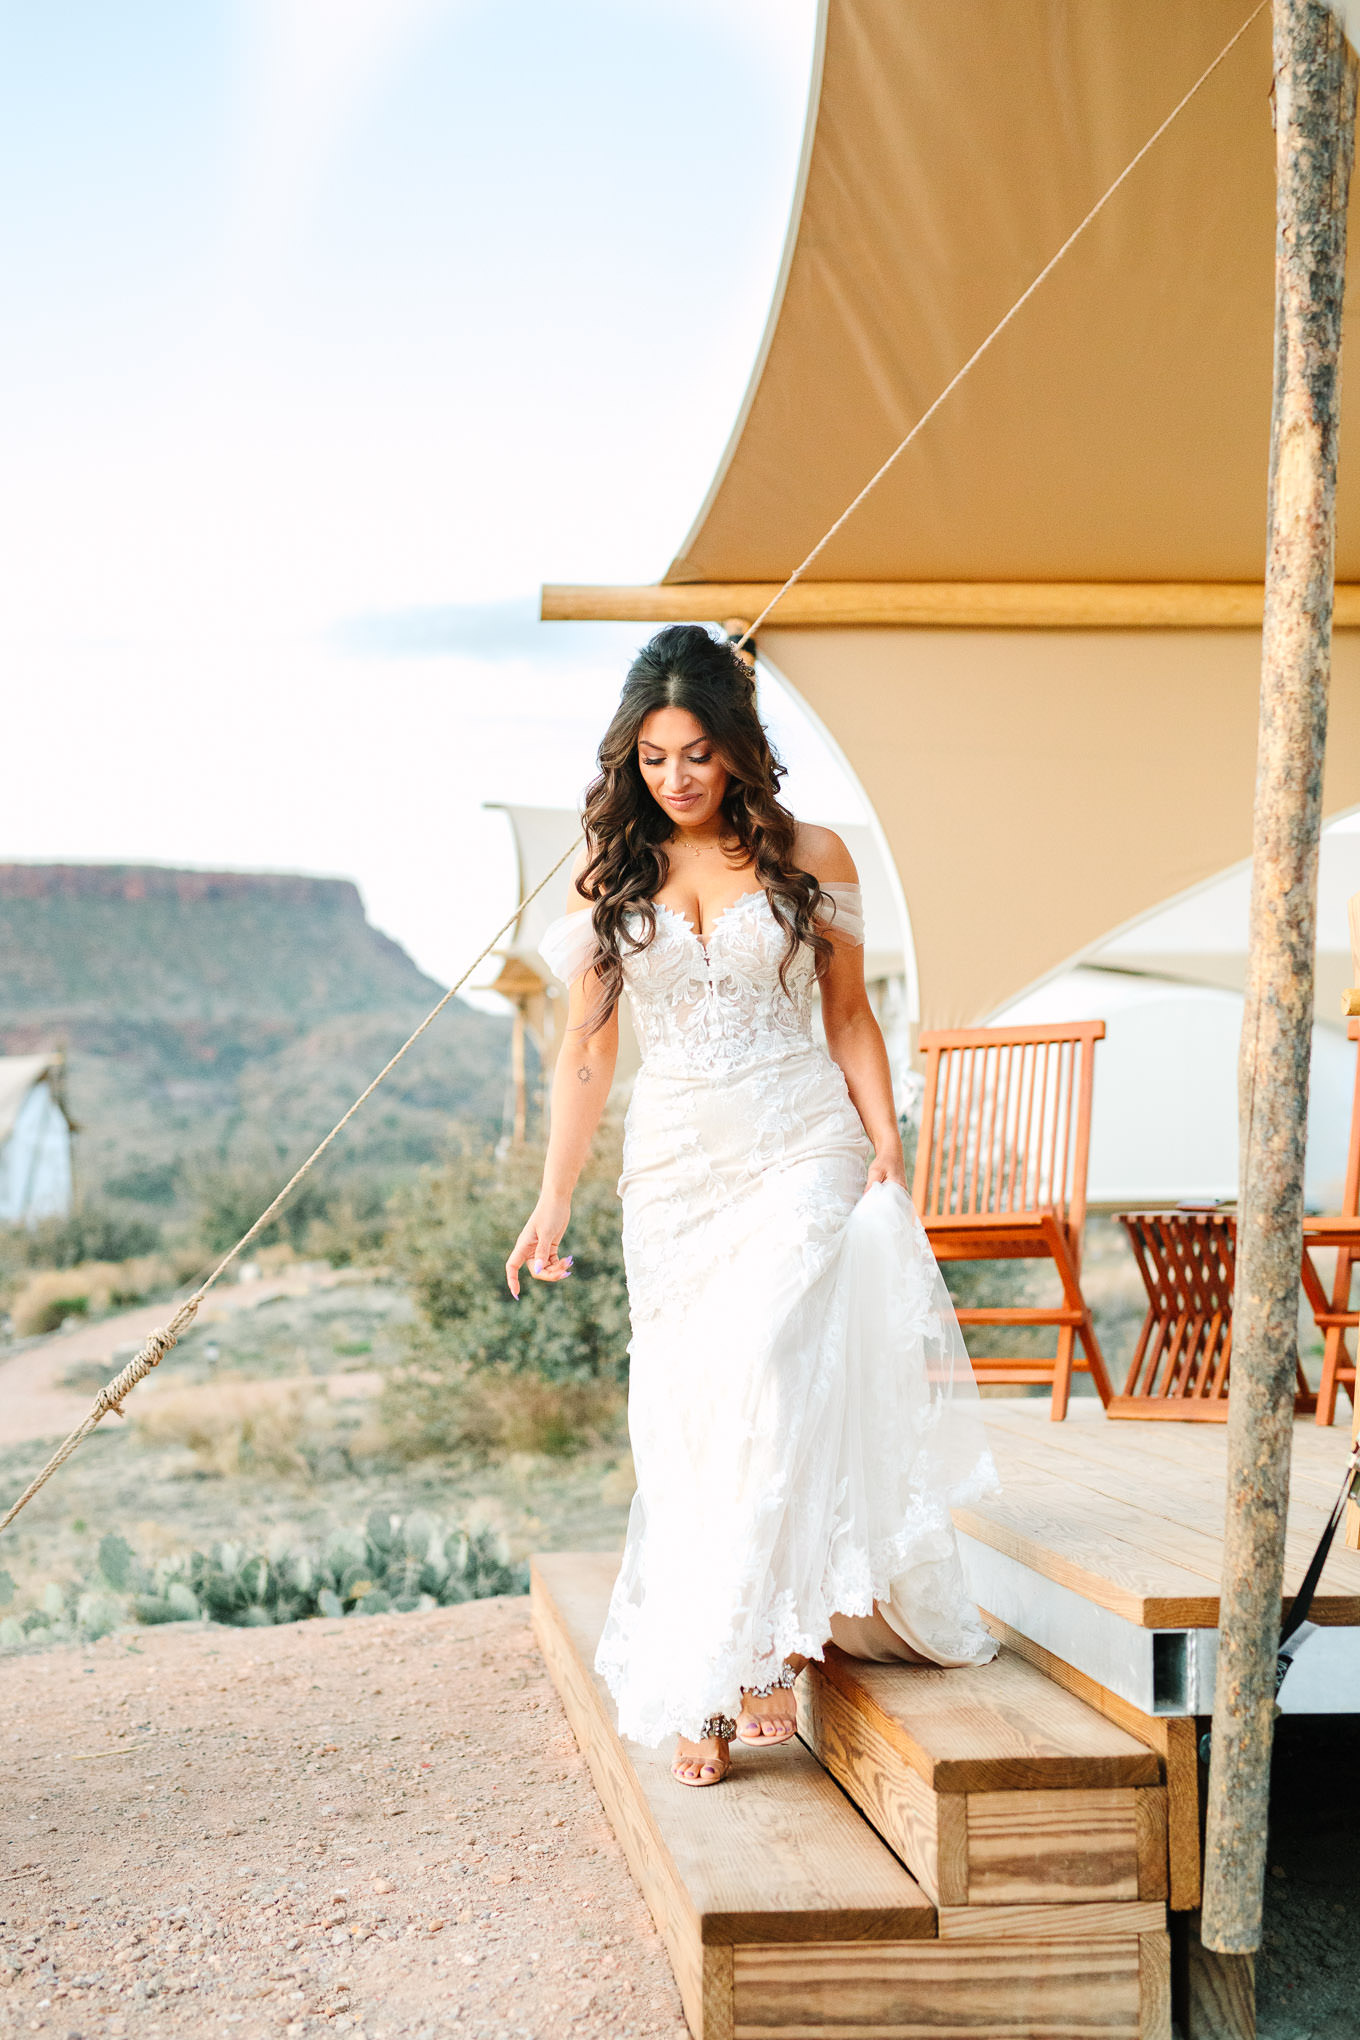 Bride walking from tent to first look at sunrise | Zion Under Canvas Elopement at Sunrise | Colorful adventure elopement photography | #utahelopement #zionelopement #zionwedding #undercanvaszion #sunriseelopement  Source: Mary Costa Photography | Los Angeles